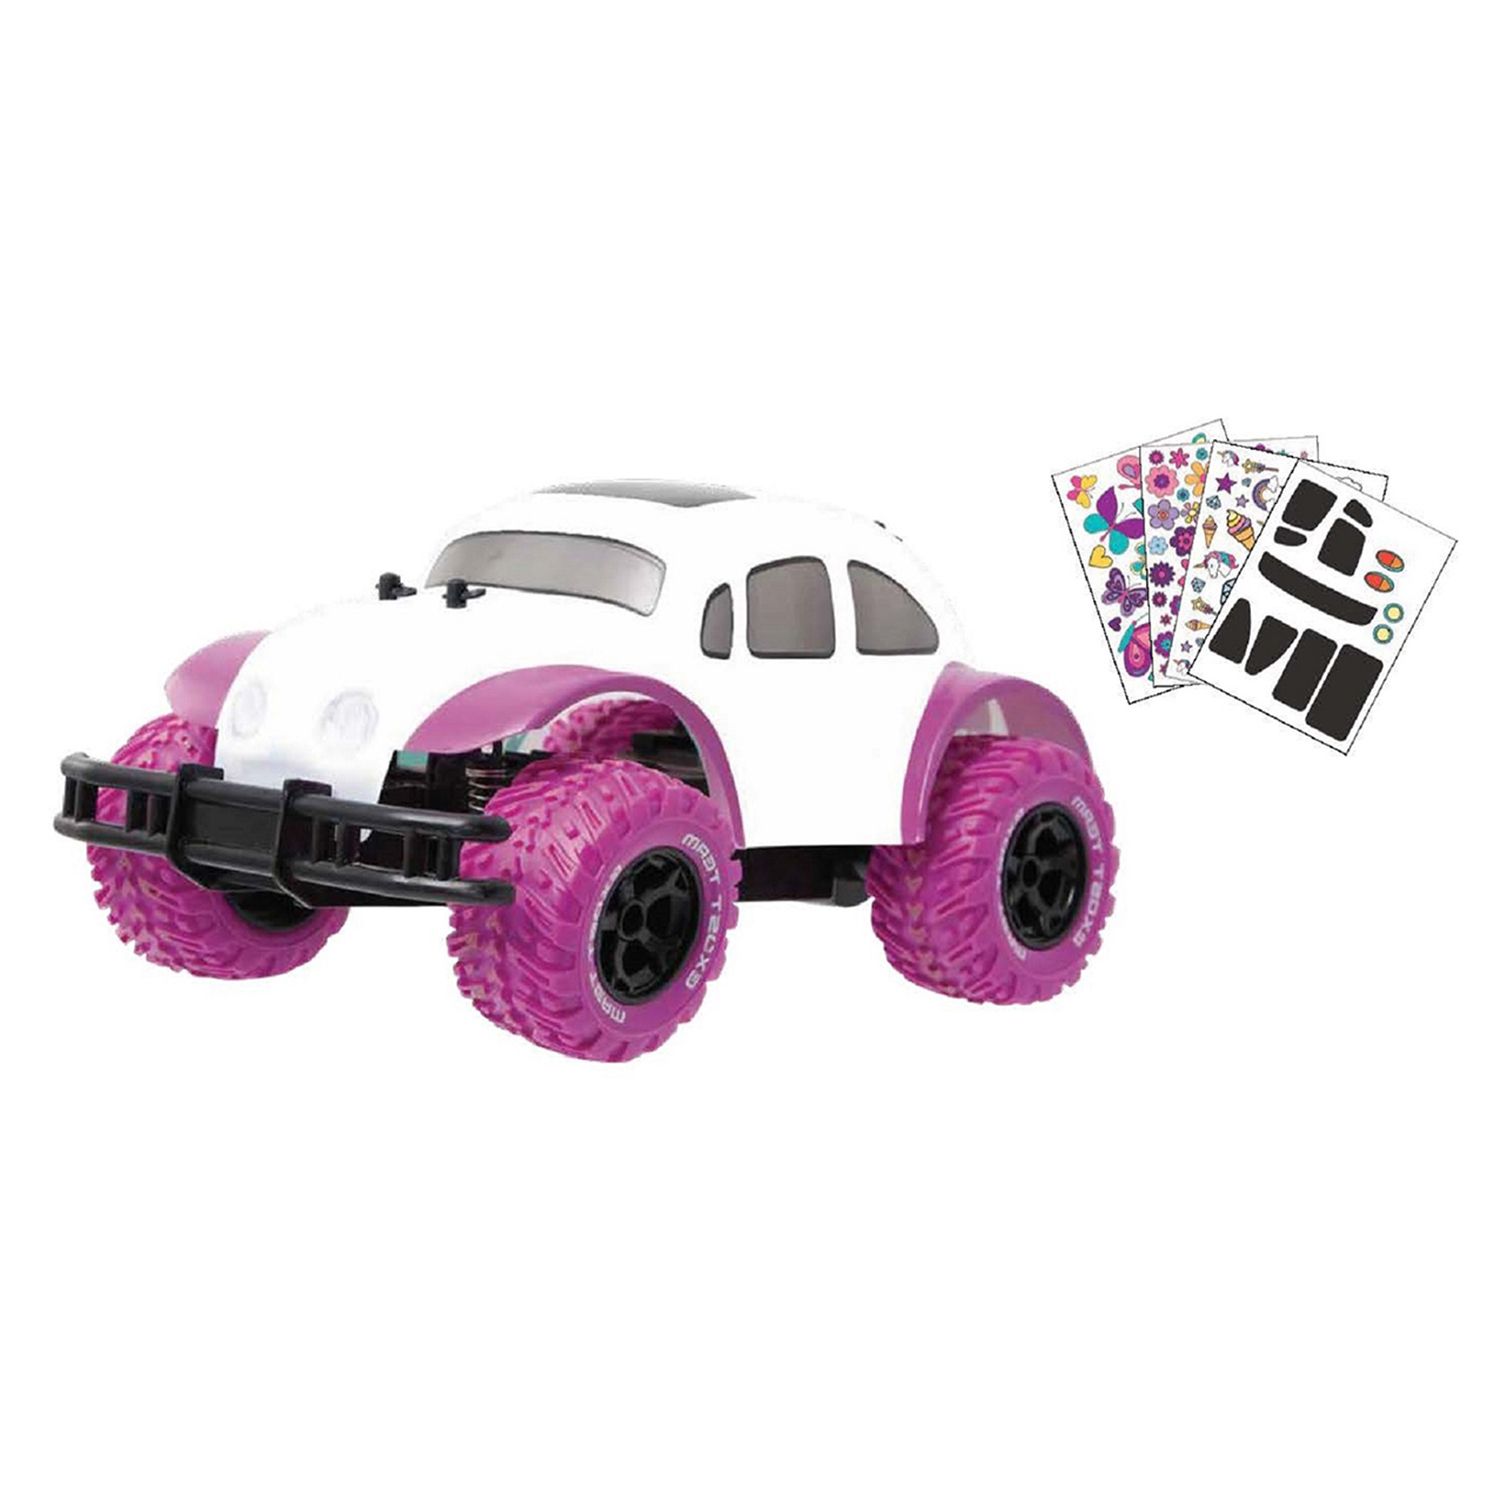 pink remote control monster truck